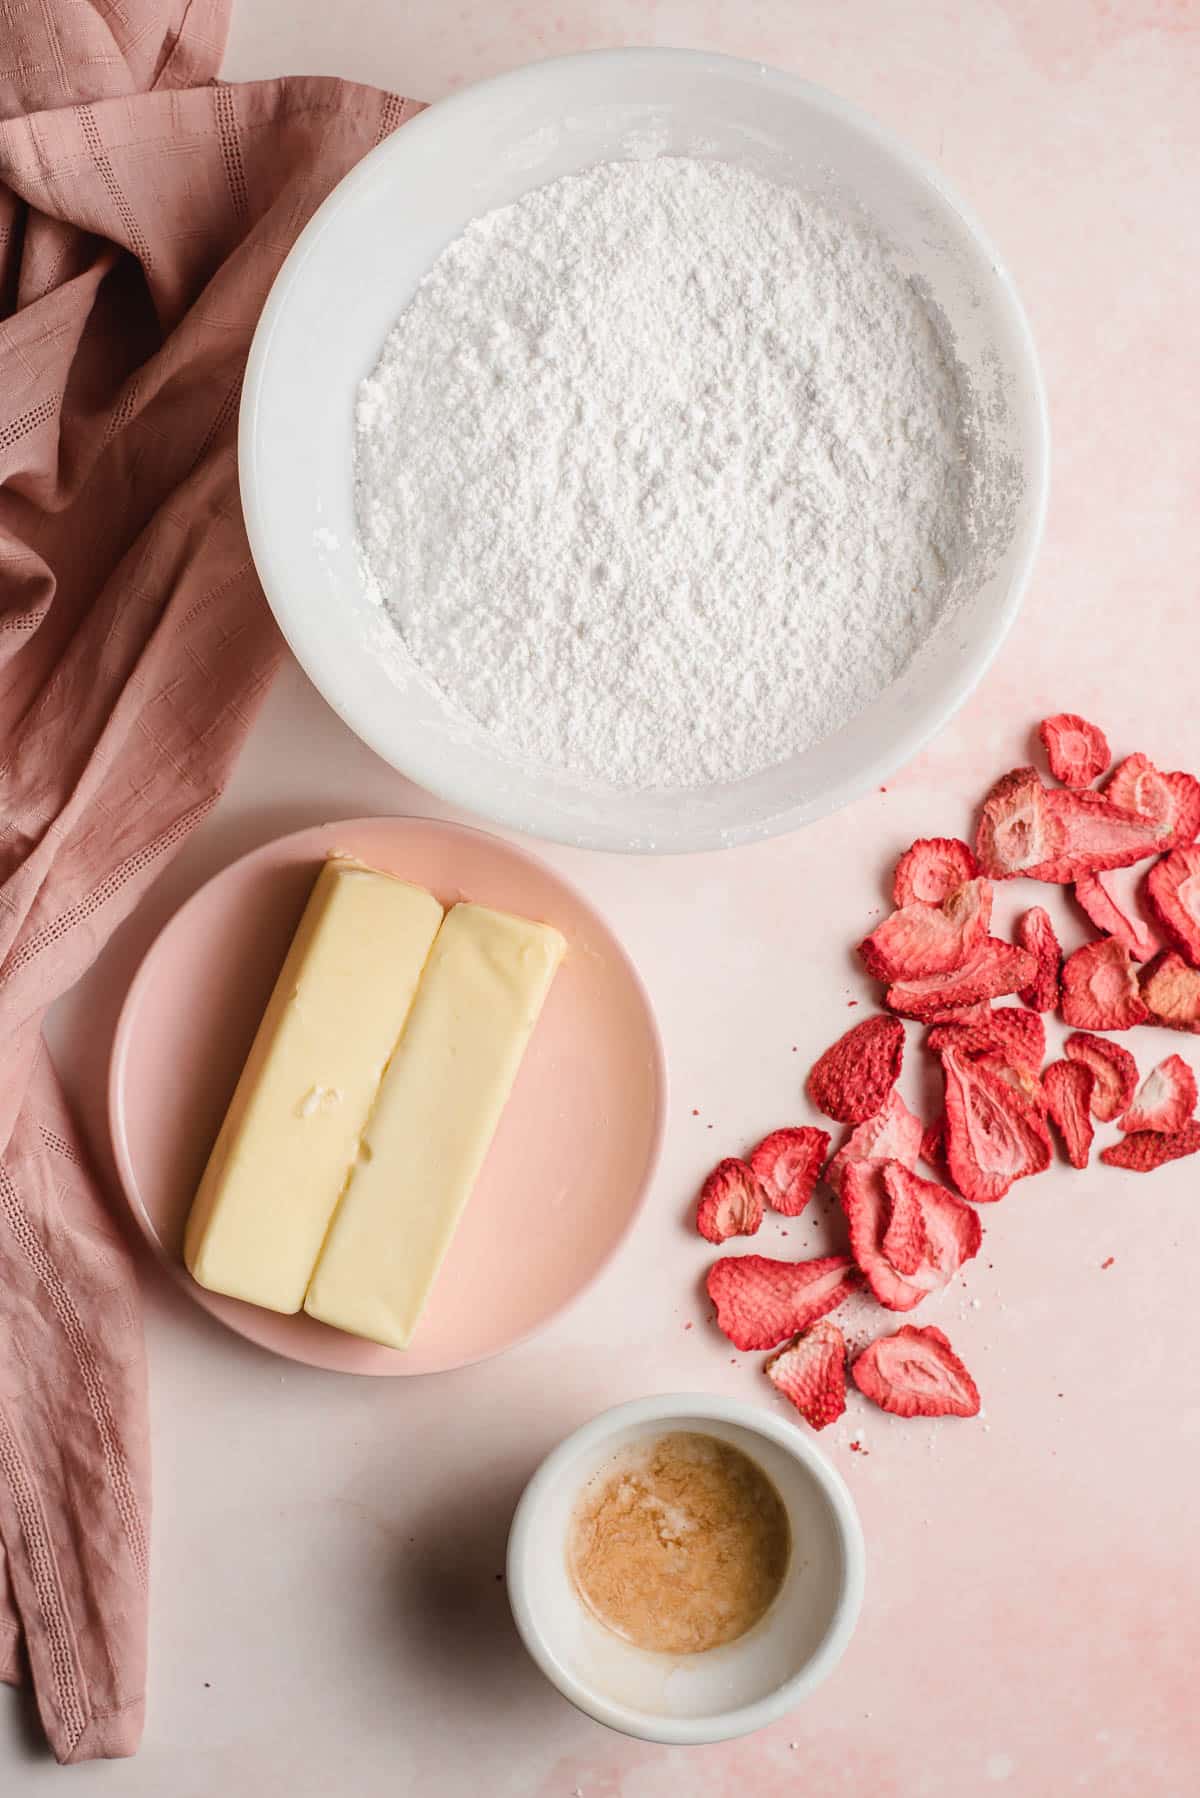 Powdered sugar, butter, dried strawberries, and vanilla extract shown in bowls on a pink background.